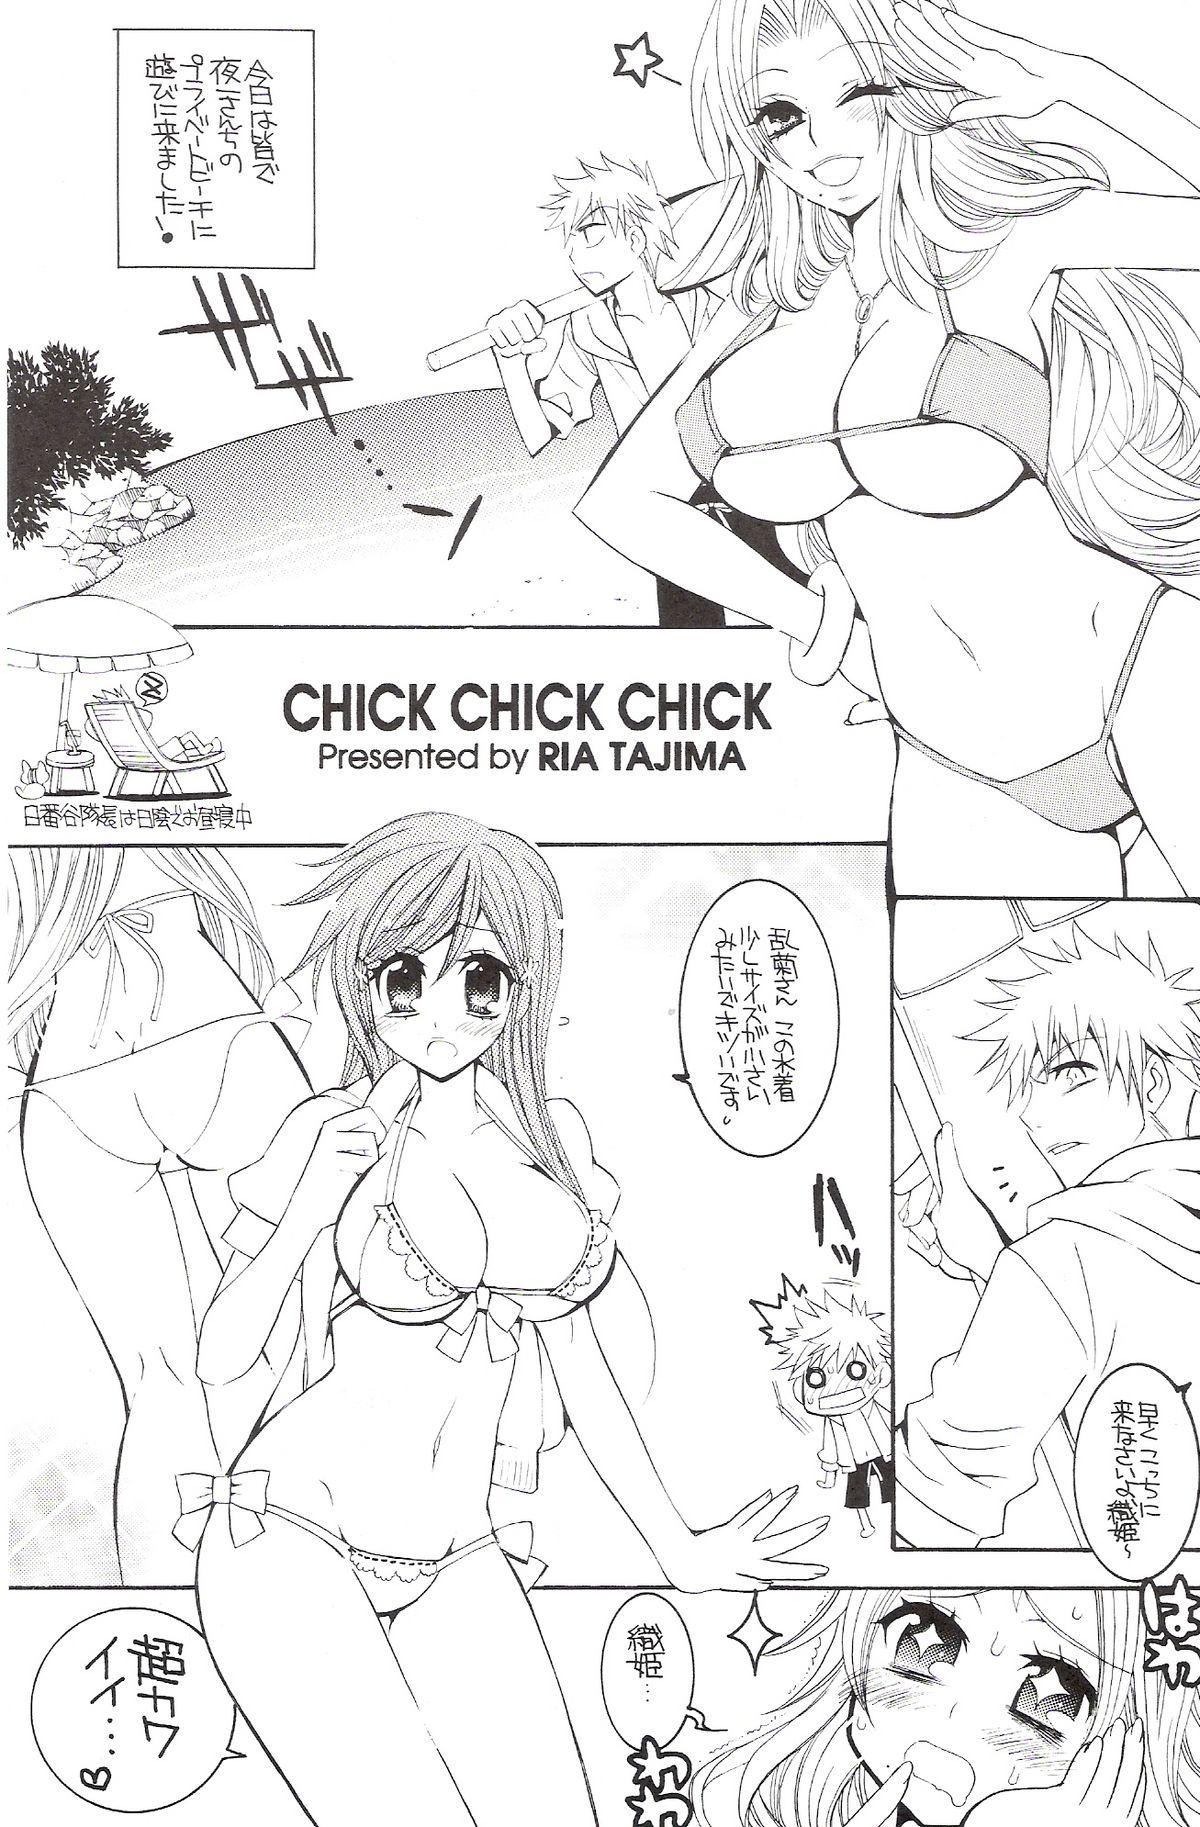 Pareja CHICK CHICK CHICK - Bleach Pool - Page 4